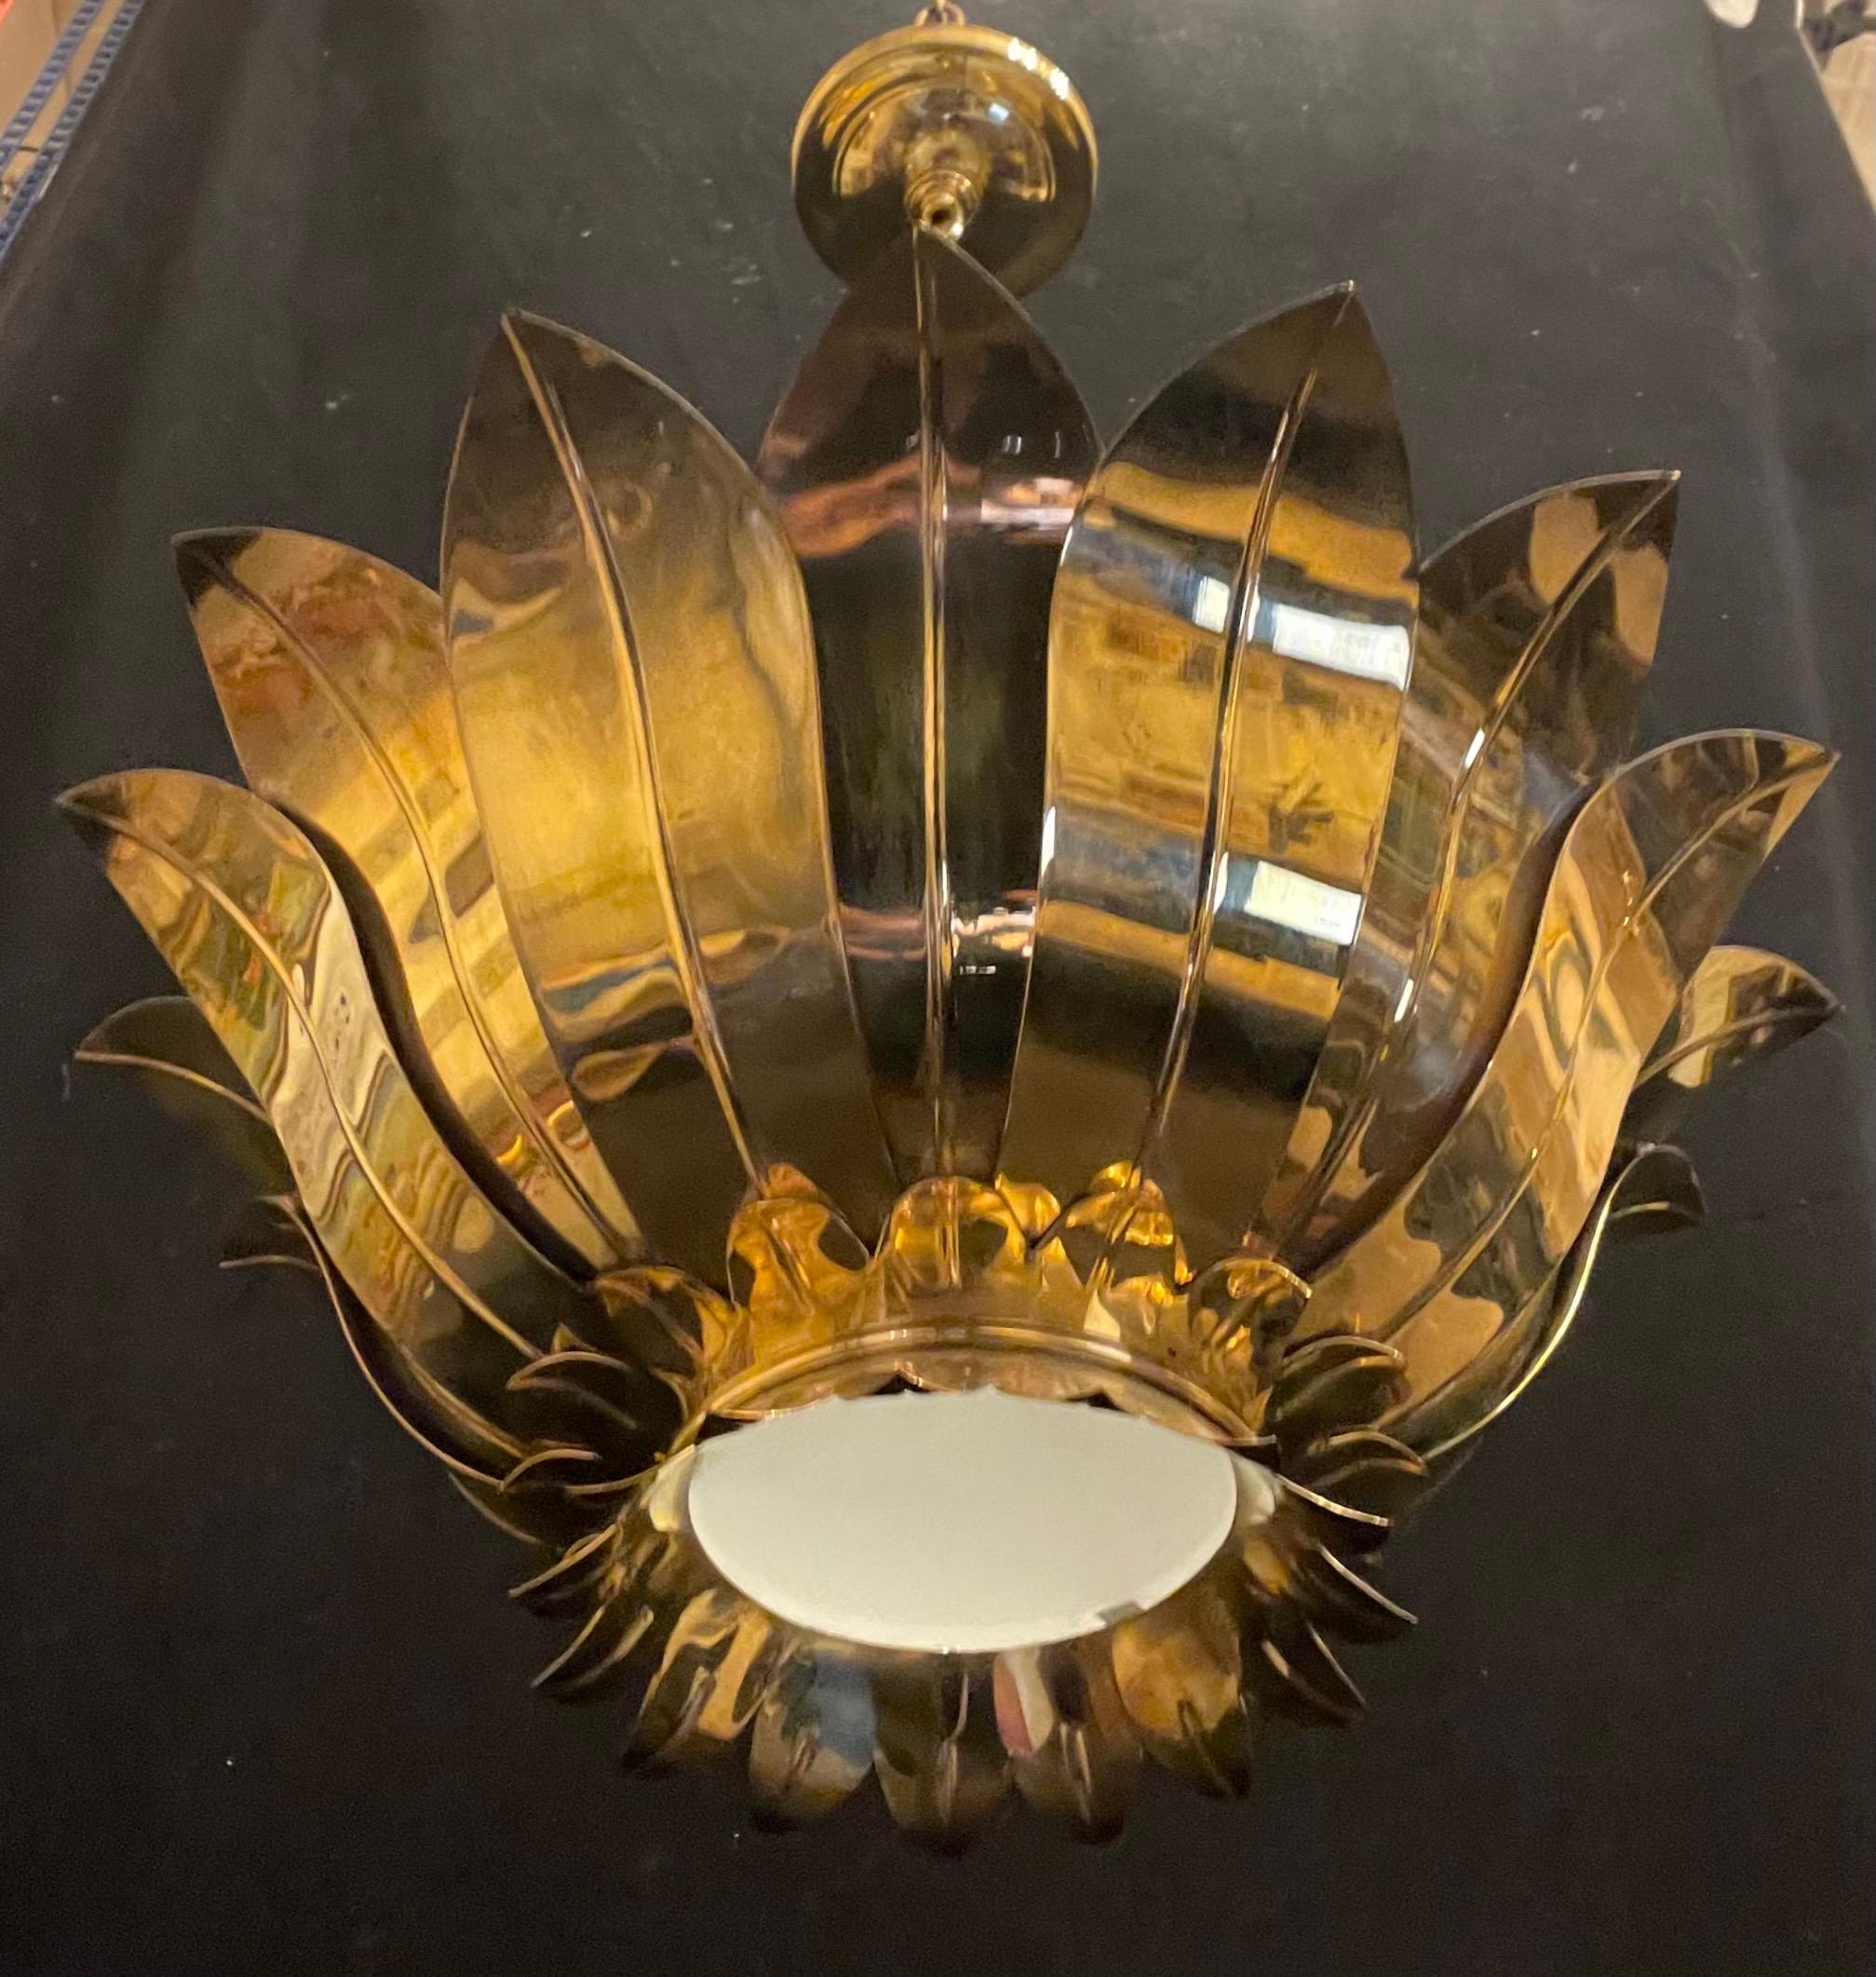 A Wonderful Pair Of Mid Century Modern Style Brass Sun Flower / Star Burst Leaf Form Light Fixtures, Each Fixture Had 3 Edison Lights With A Frosted Glass Center Bottom To Allow The Light Through.

Each Light Fixture Is Sold Individually 